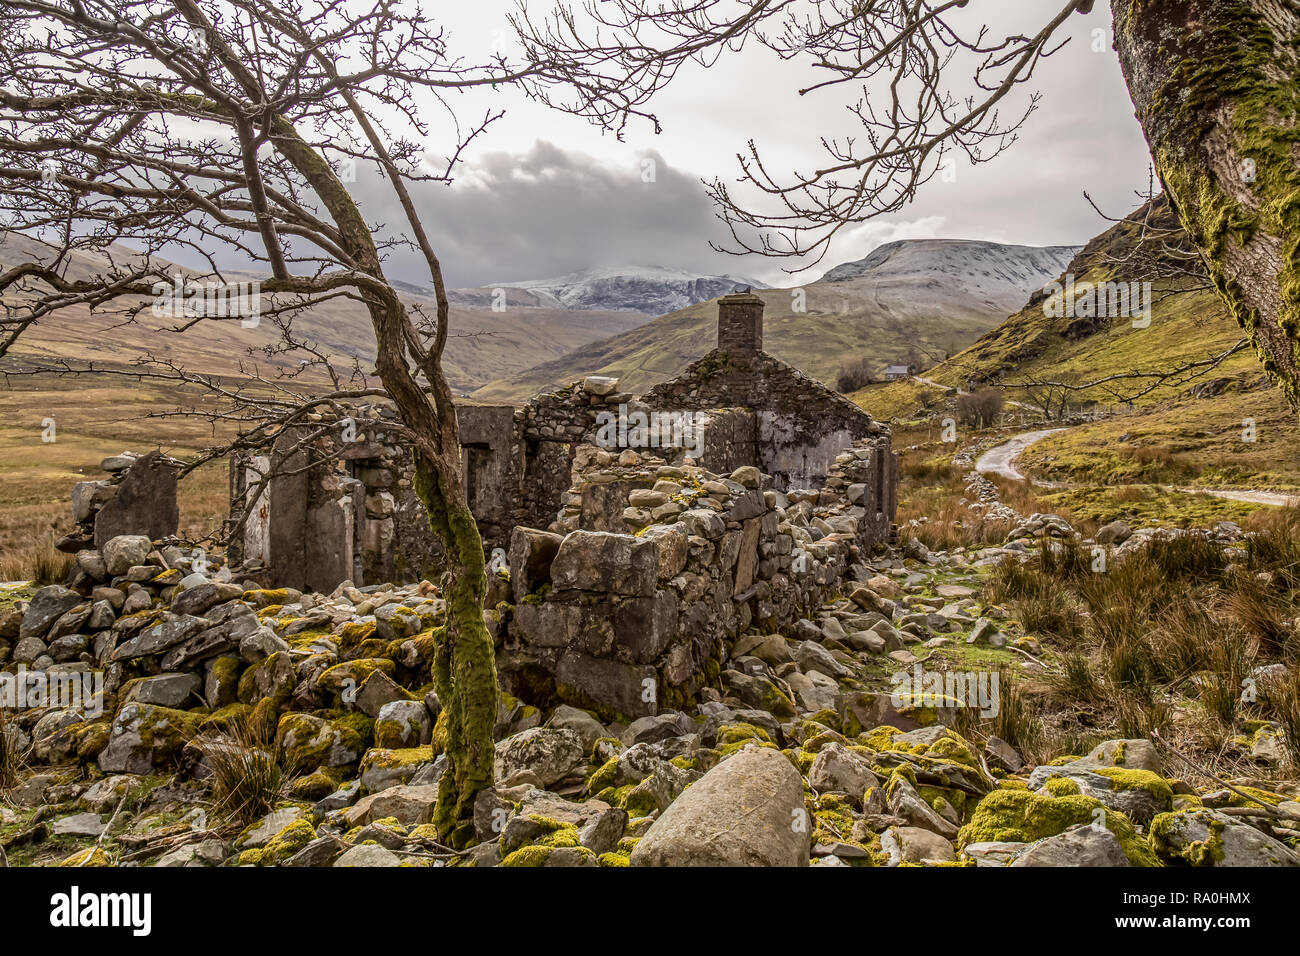 A ruined, abandoned stone built cottage, near Llanberis in the Snowdonia National Park in North Wales. Stock Photo